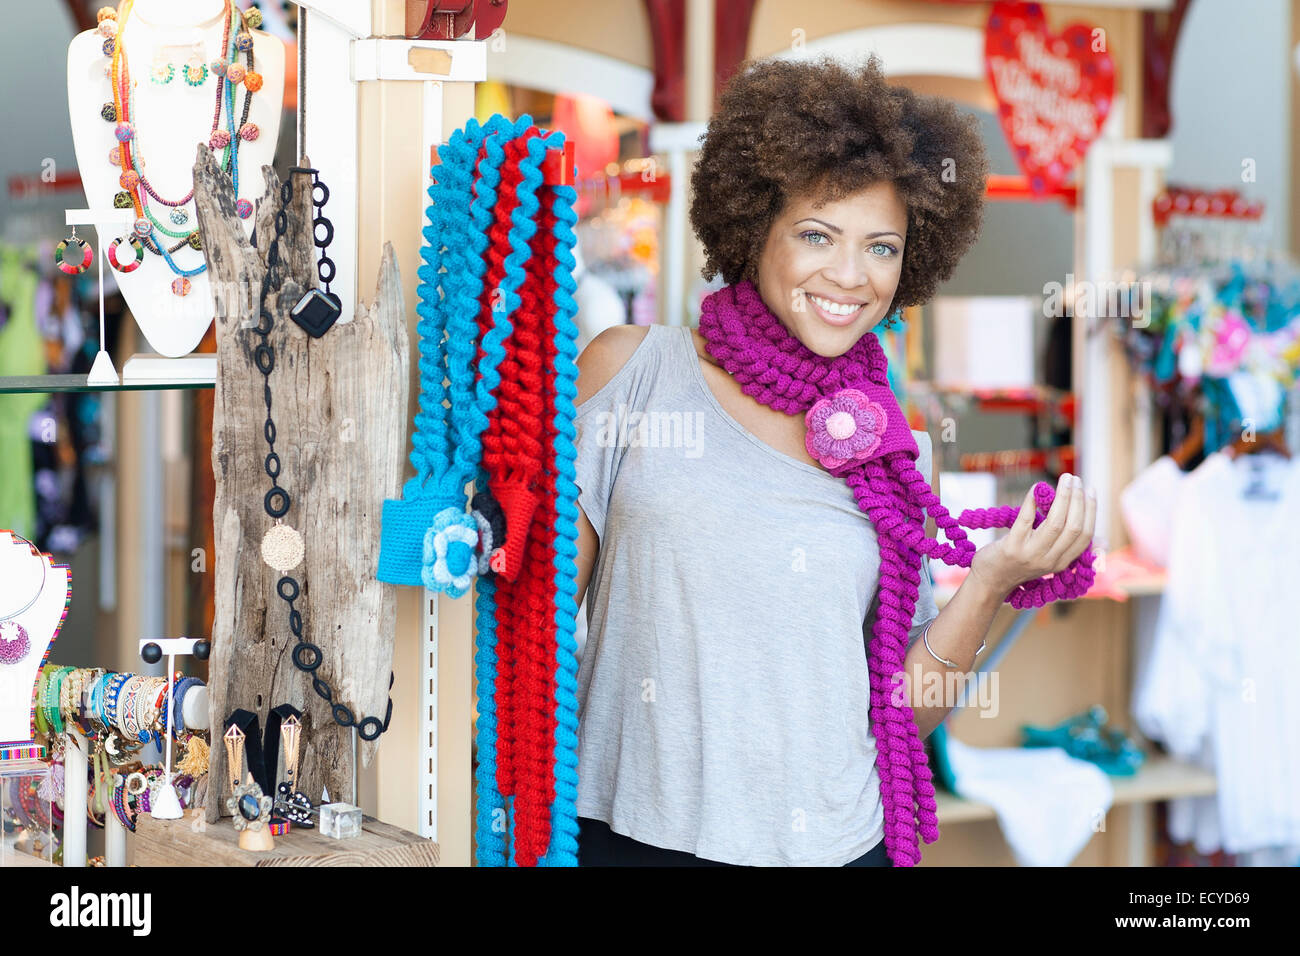 Mixed race woman trying on necklaces in store Stock Photo